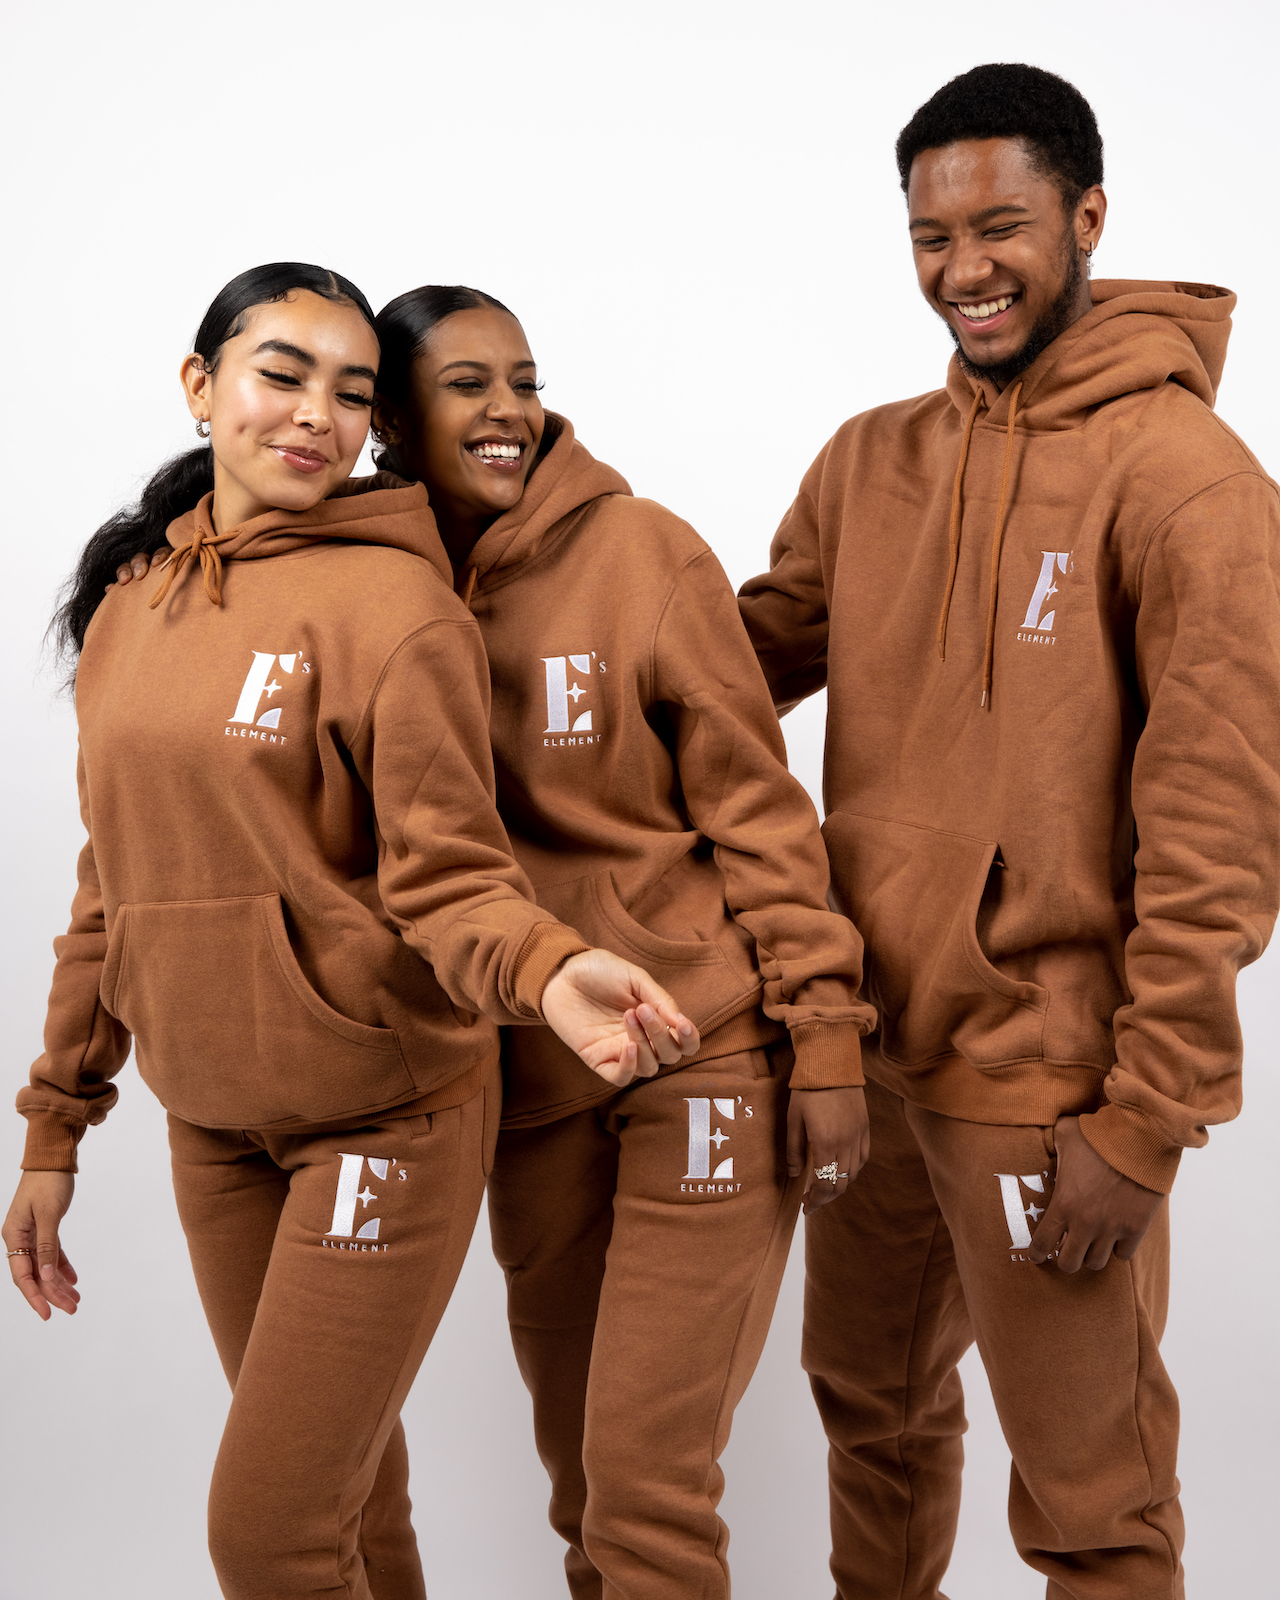 Shop Sweatsuit Collection, Hoodies and Sweatpants